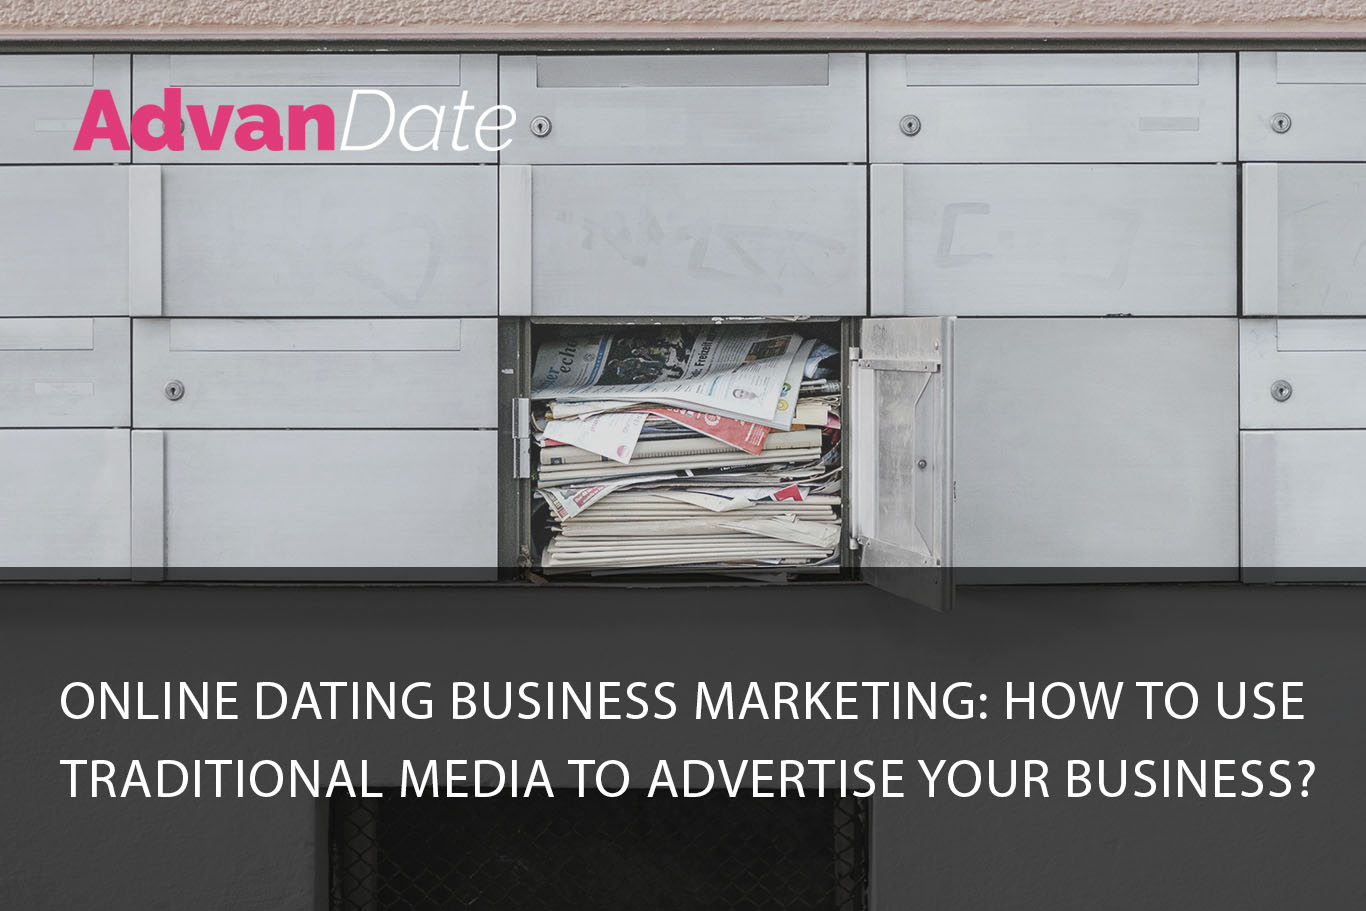 Online dating business marketing: how to use traditional media to advertise your business